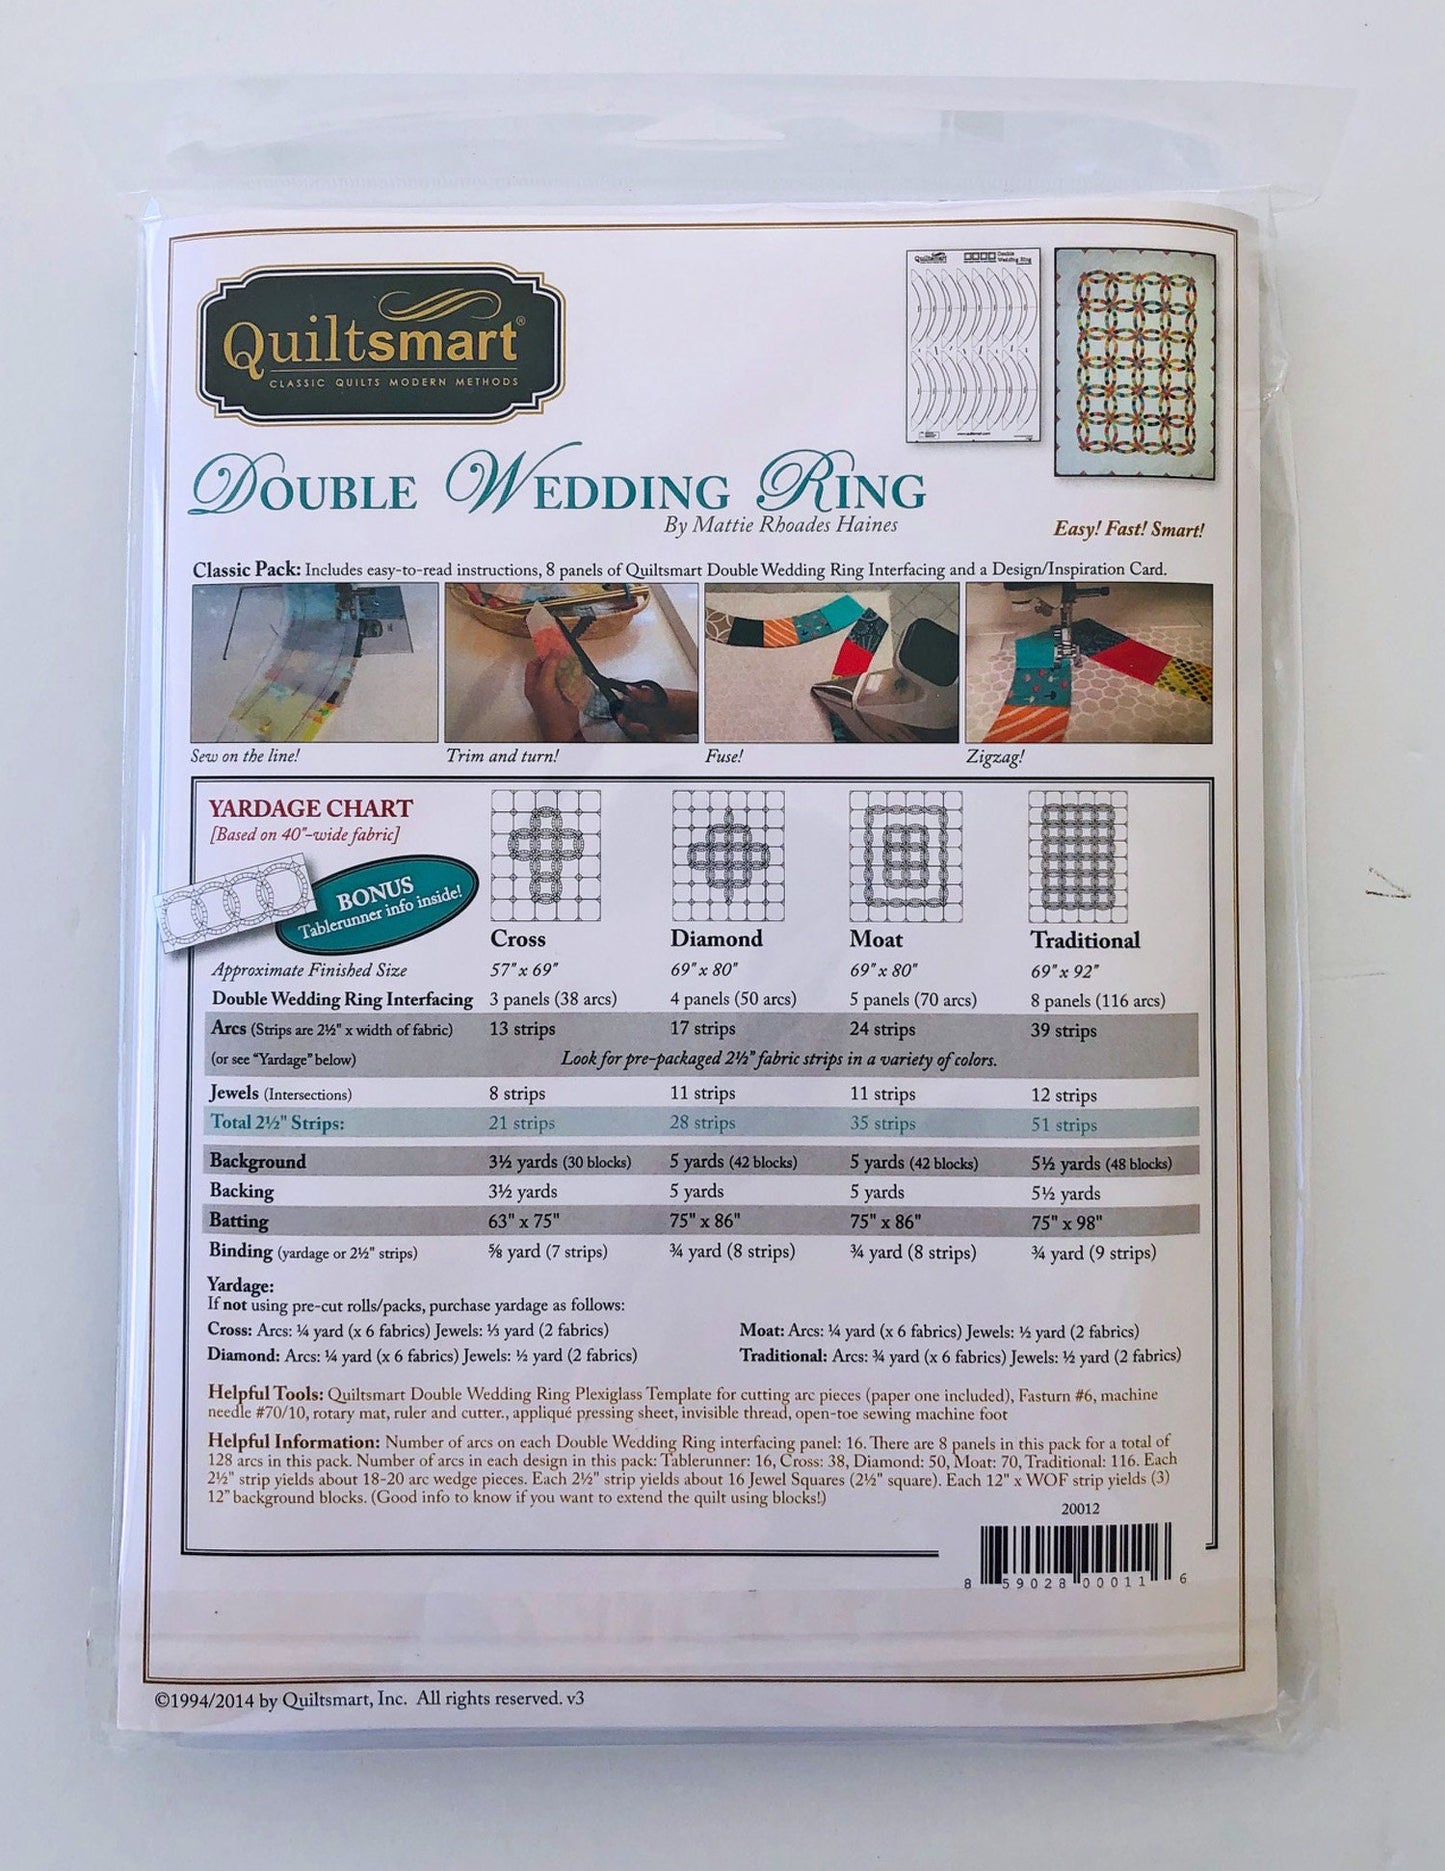 Double Wedding Ring Classic Pack, Quiltsmart QS 20012, Printed Fusible Interfacing, Applique Quilt, Jelly Roll or Mini Charm Friendly